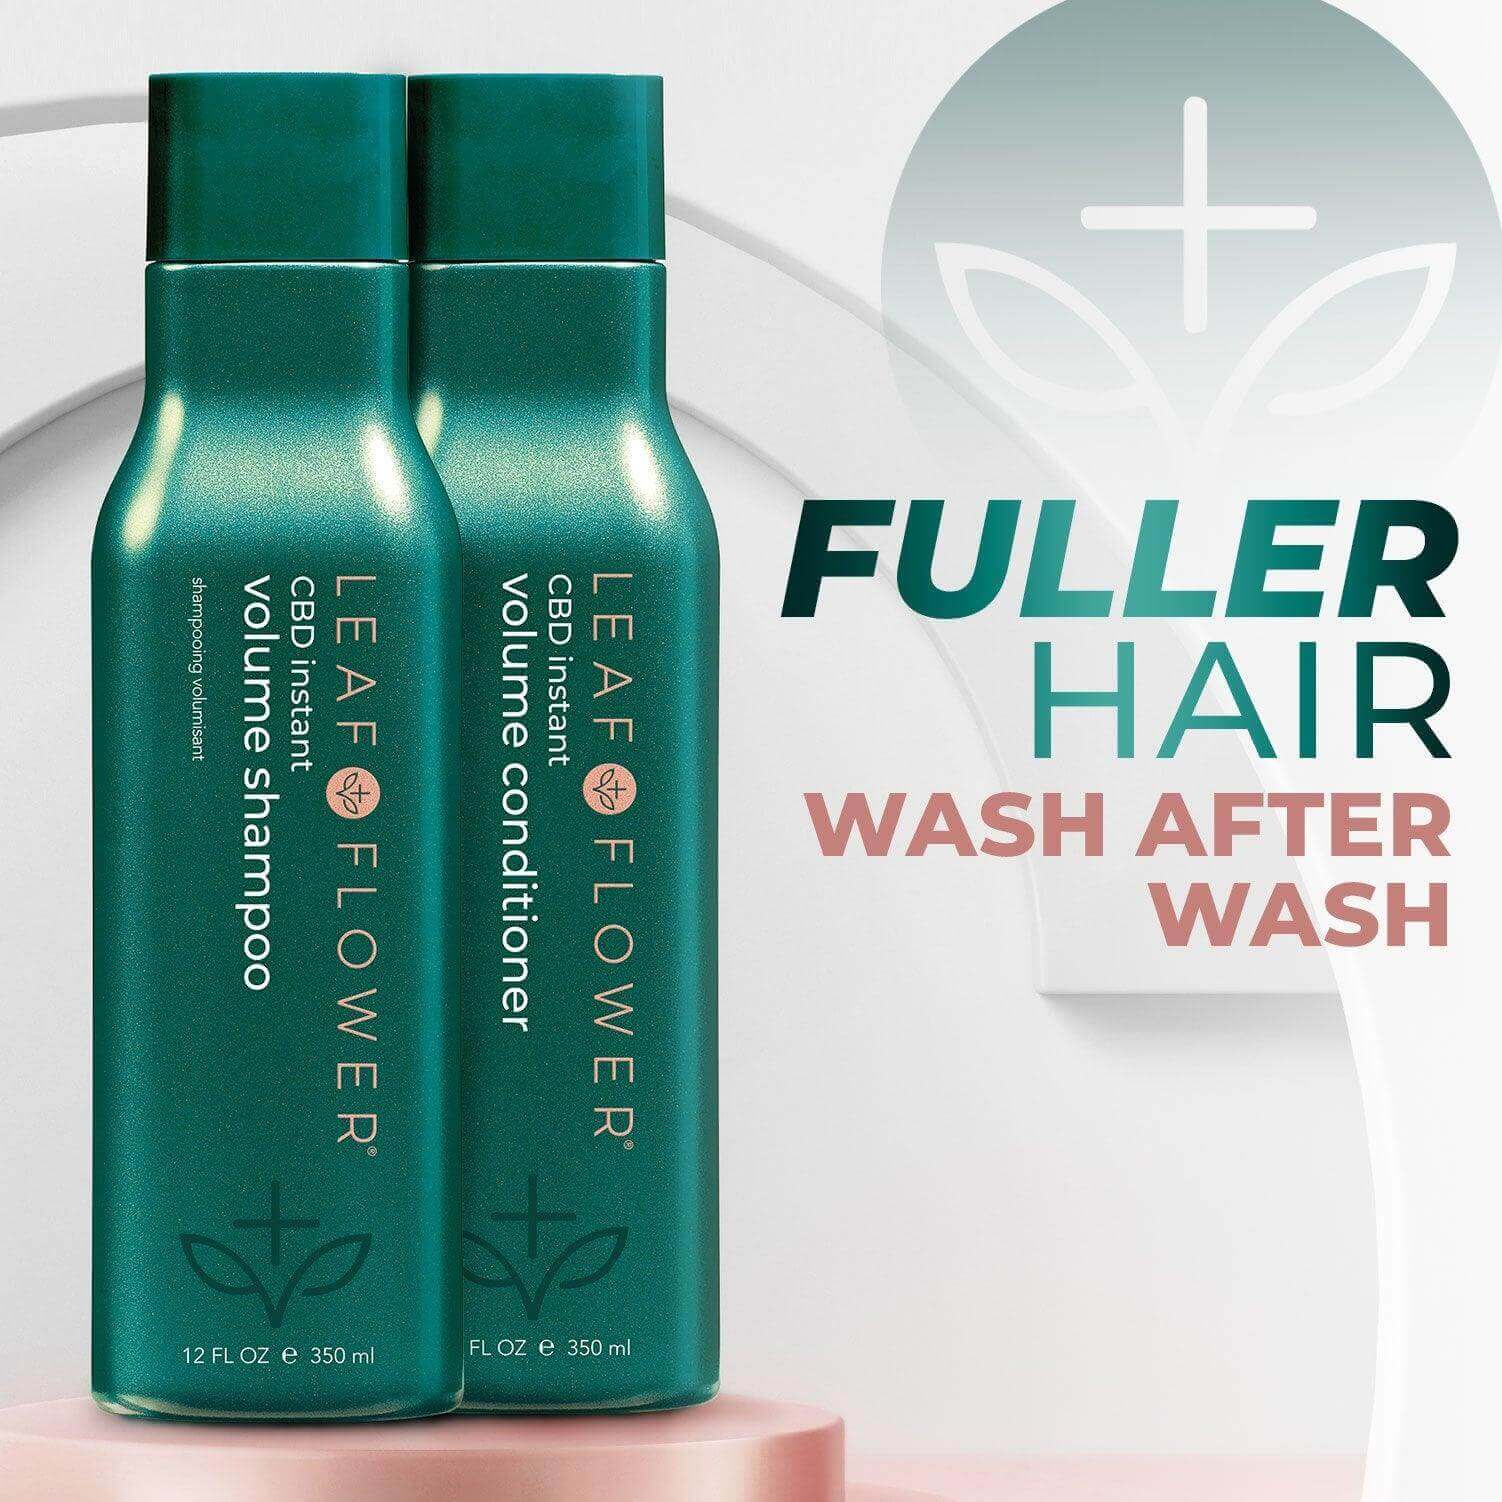 Leaf and Flower Instant Volume Shampoo and Conditioner Duo for fine hair, wash after wash.